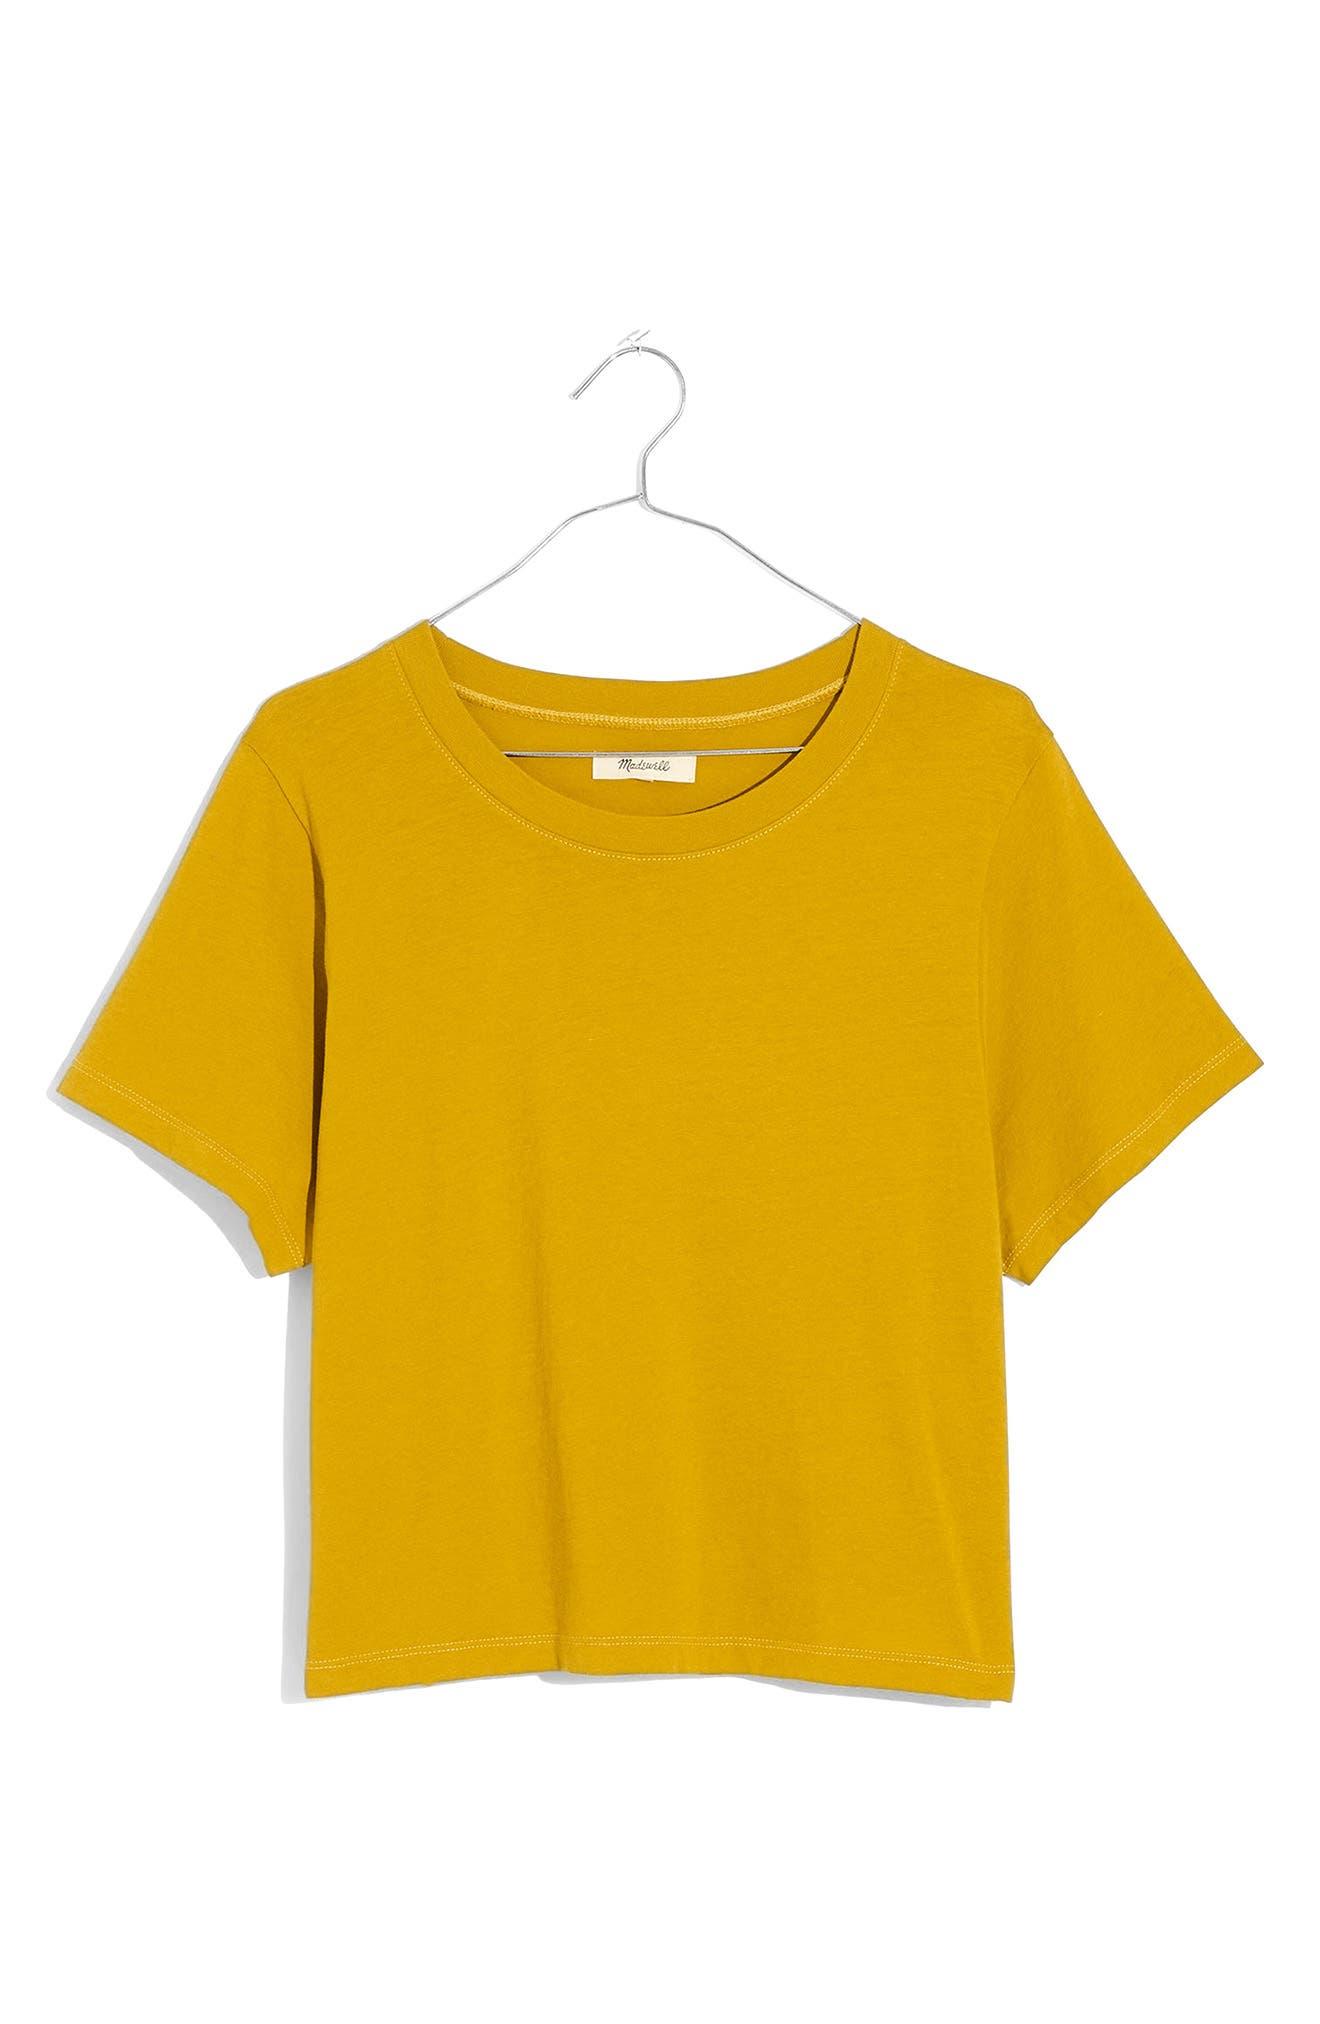 Madewell Lakeshore Softfade Cotton Crop Tee in Yellow | Lyst